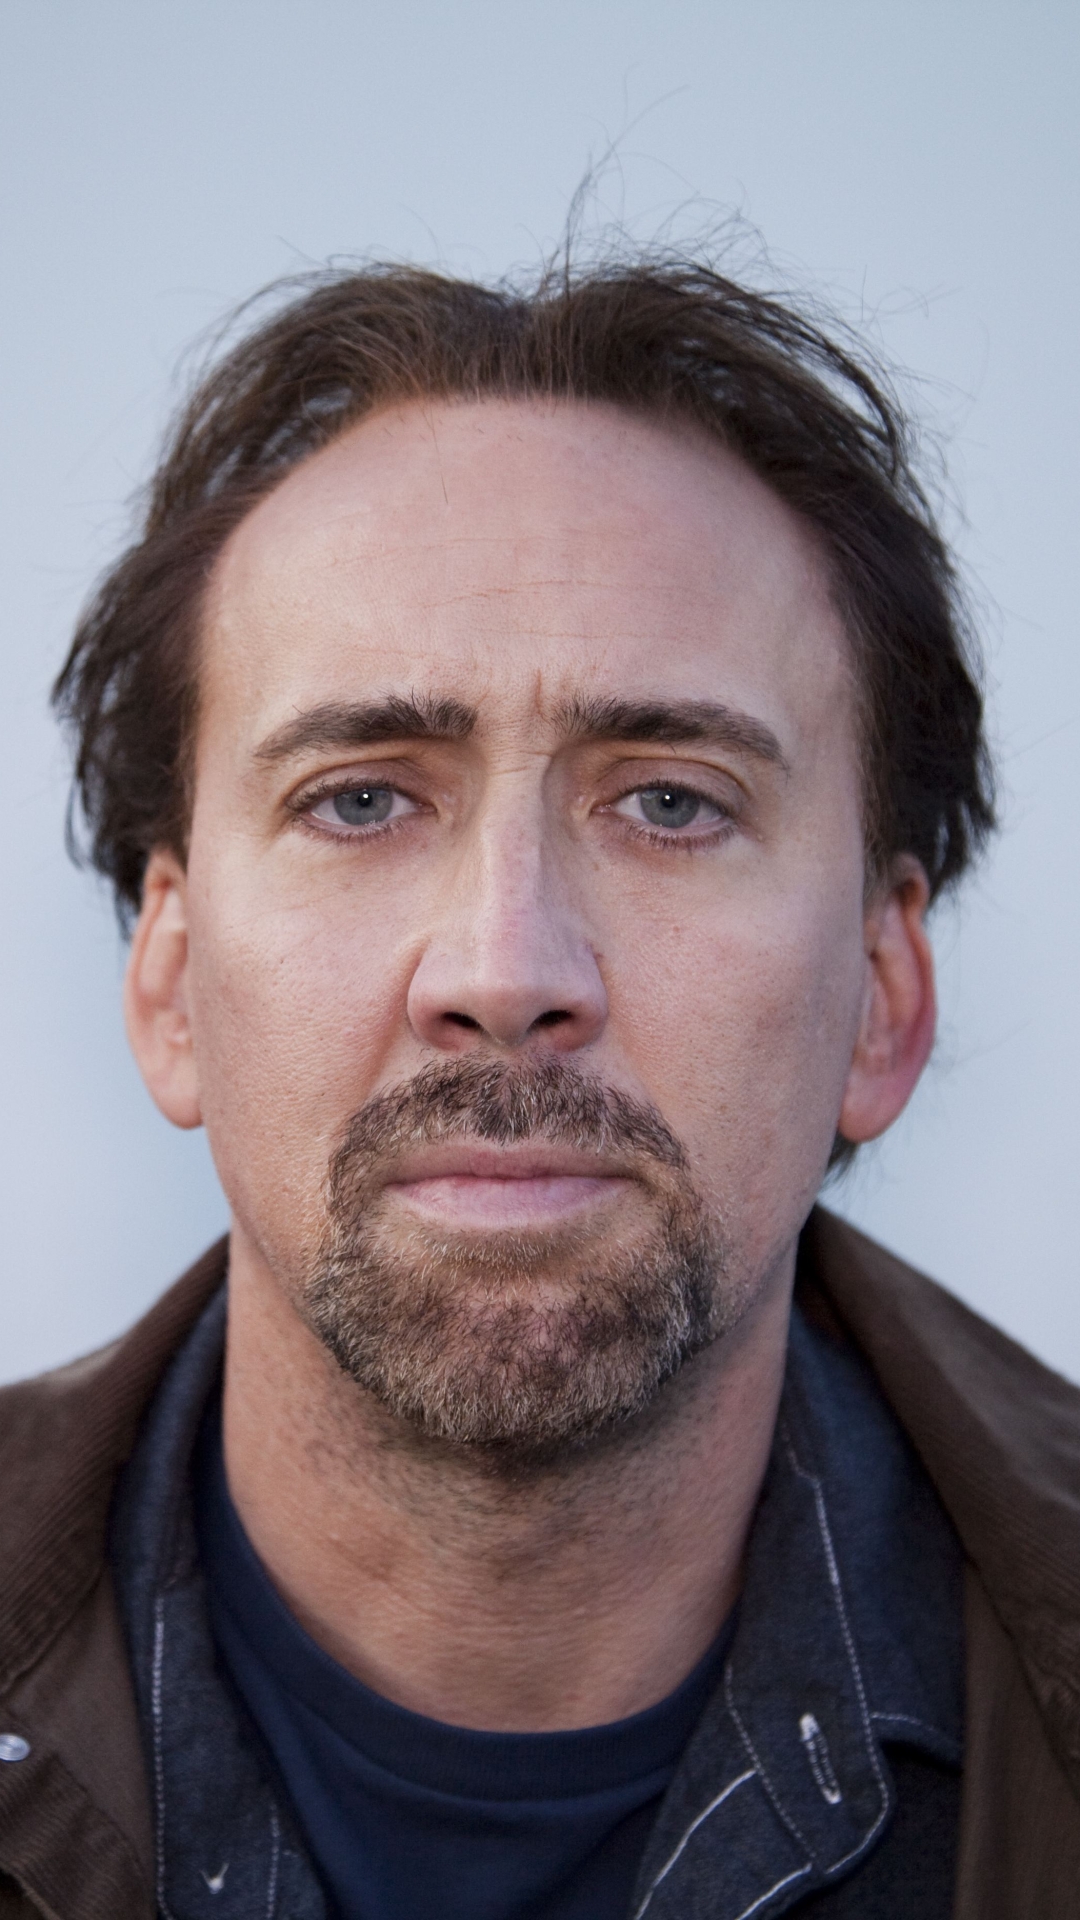 1080x1920 nicolas cage, actor, face Iphone 7, 6s, 6 Plus and Pixel XL